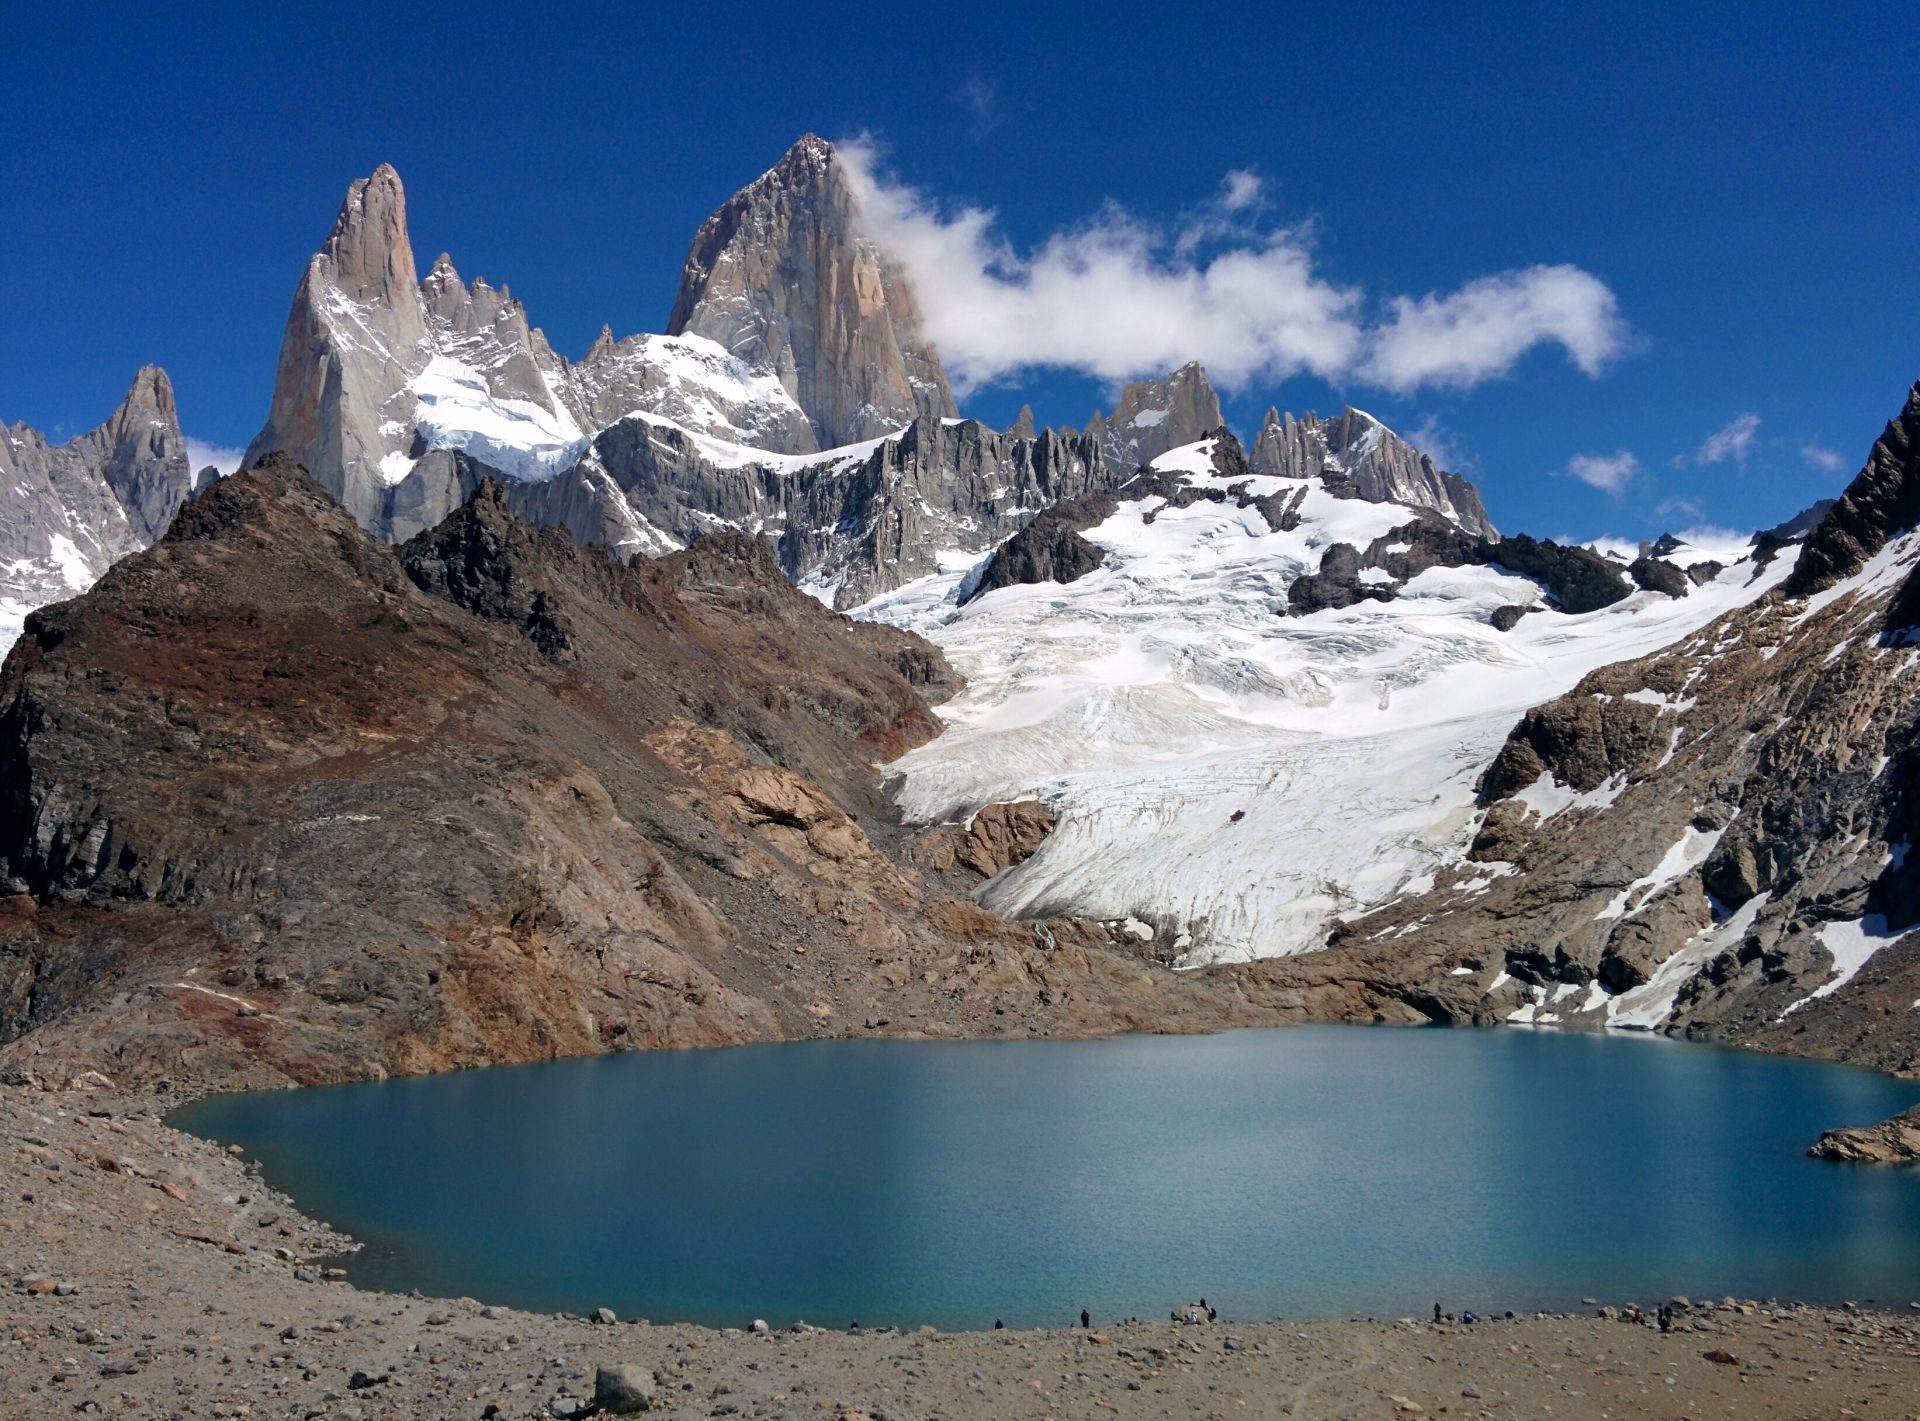 Laguna de Los Tres with the Fitz Roy in the background